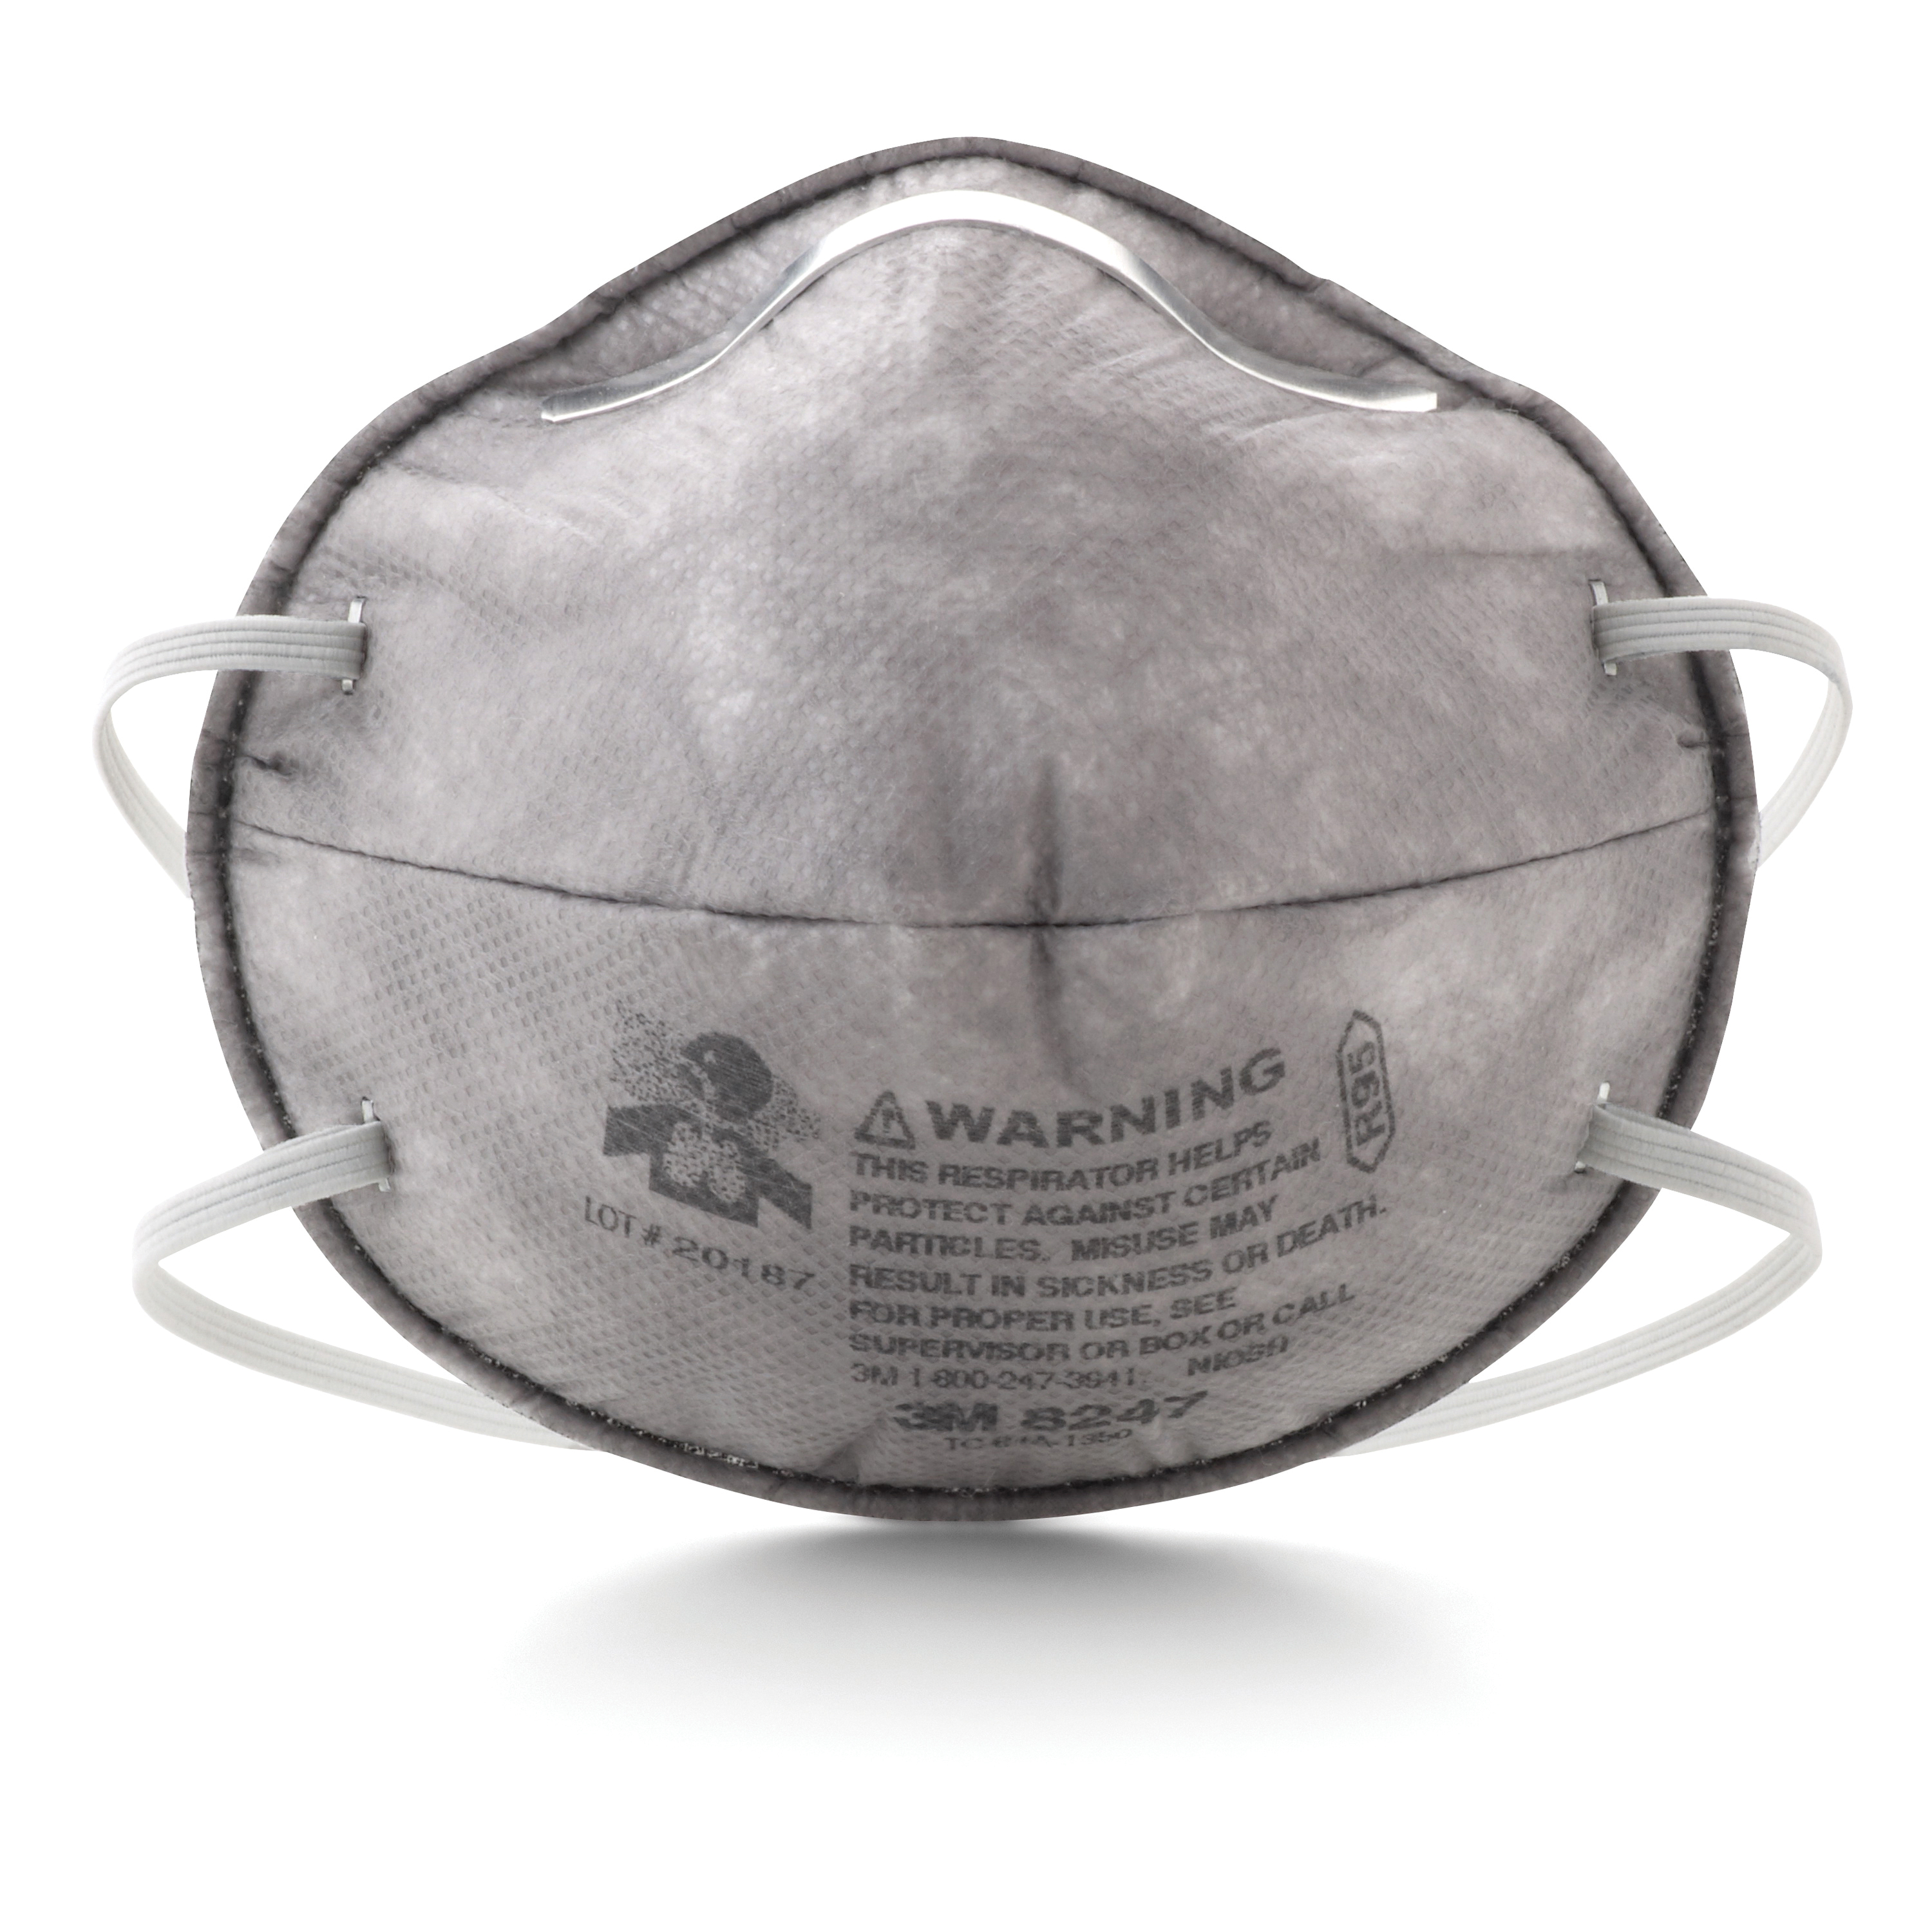 3M™ 051138-54358 8247 Cup Style Disposable Lightweight Particulate Respirator, Standard, Resists: Certain Oil, Non-Oil Based Particles and Organic Vapors